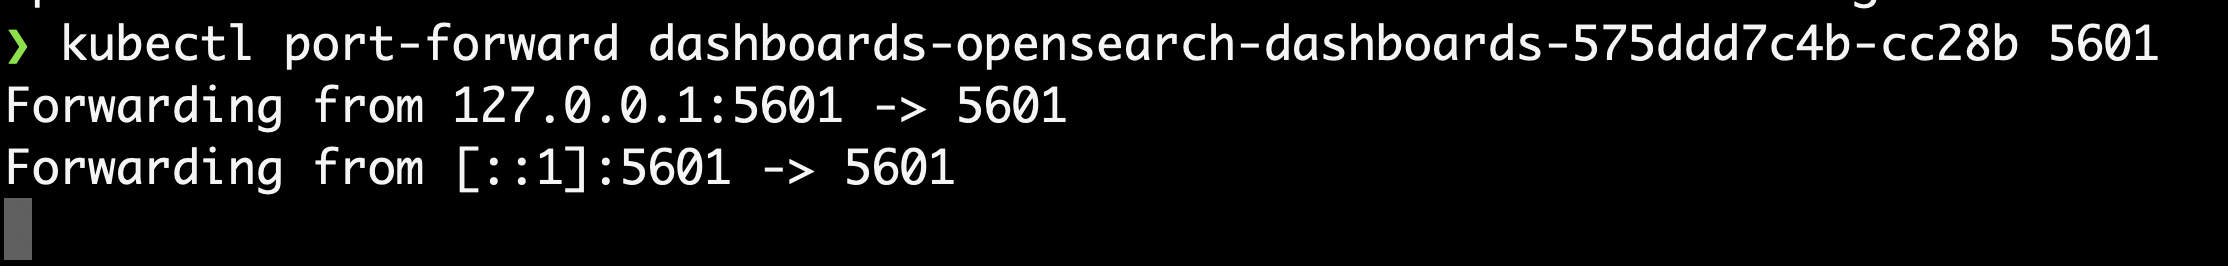 OpenSearch Dashboards Port Forward